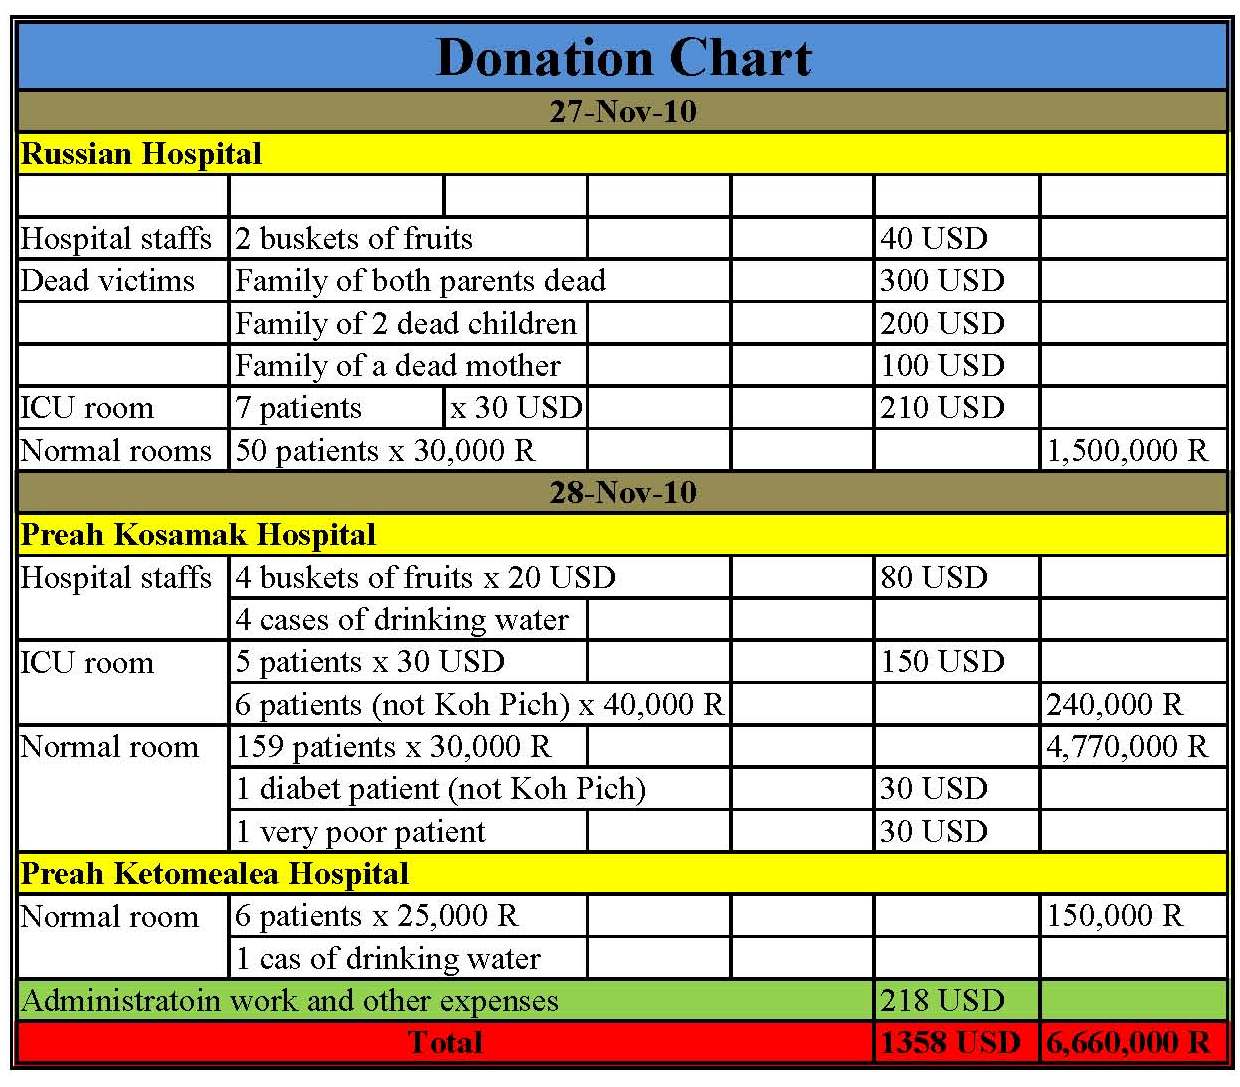 Think Before You Donate Chart